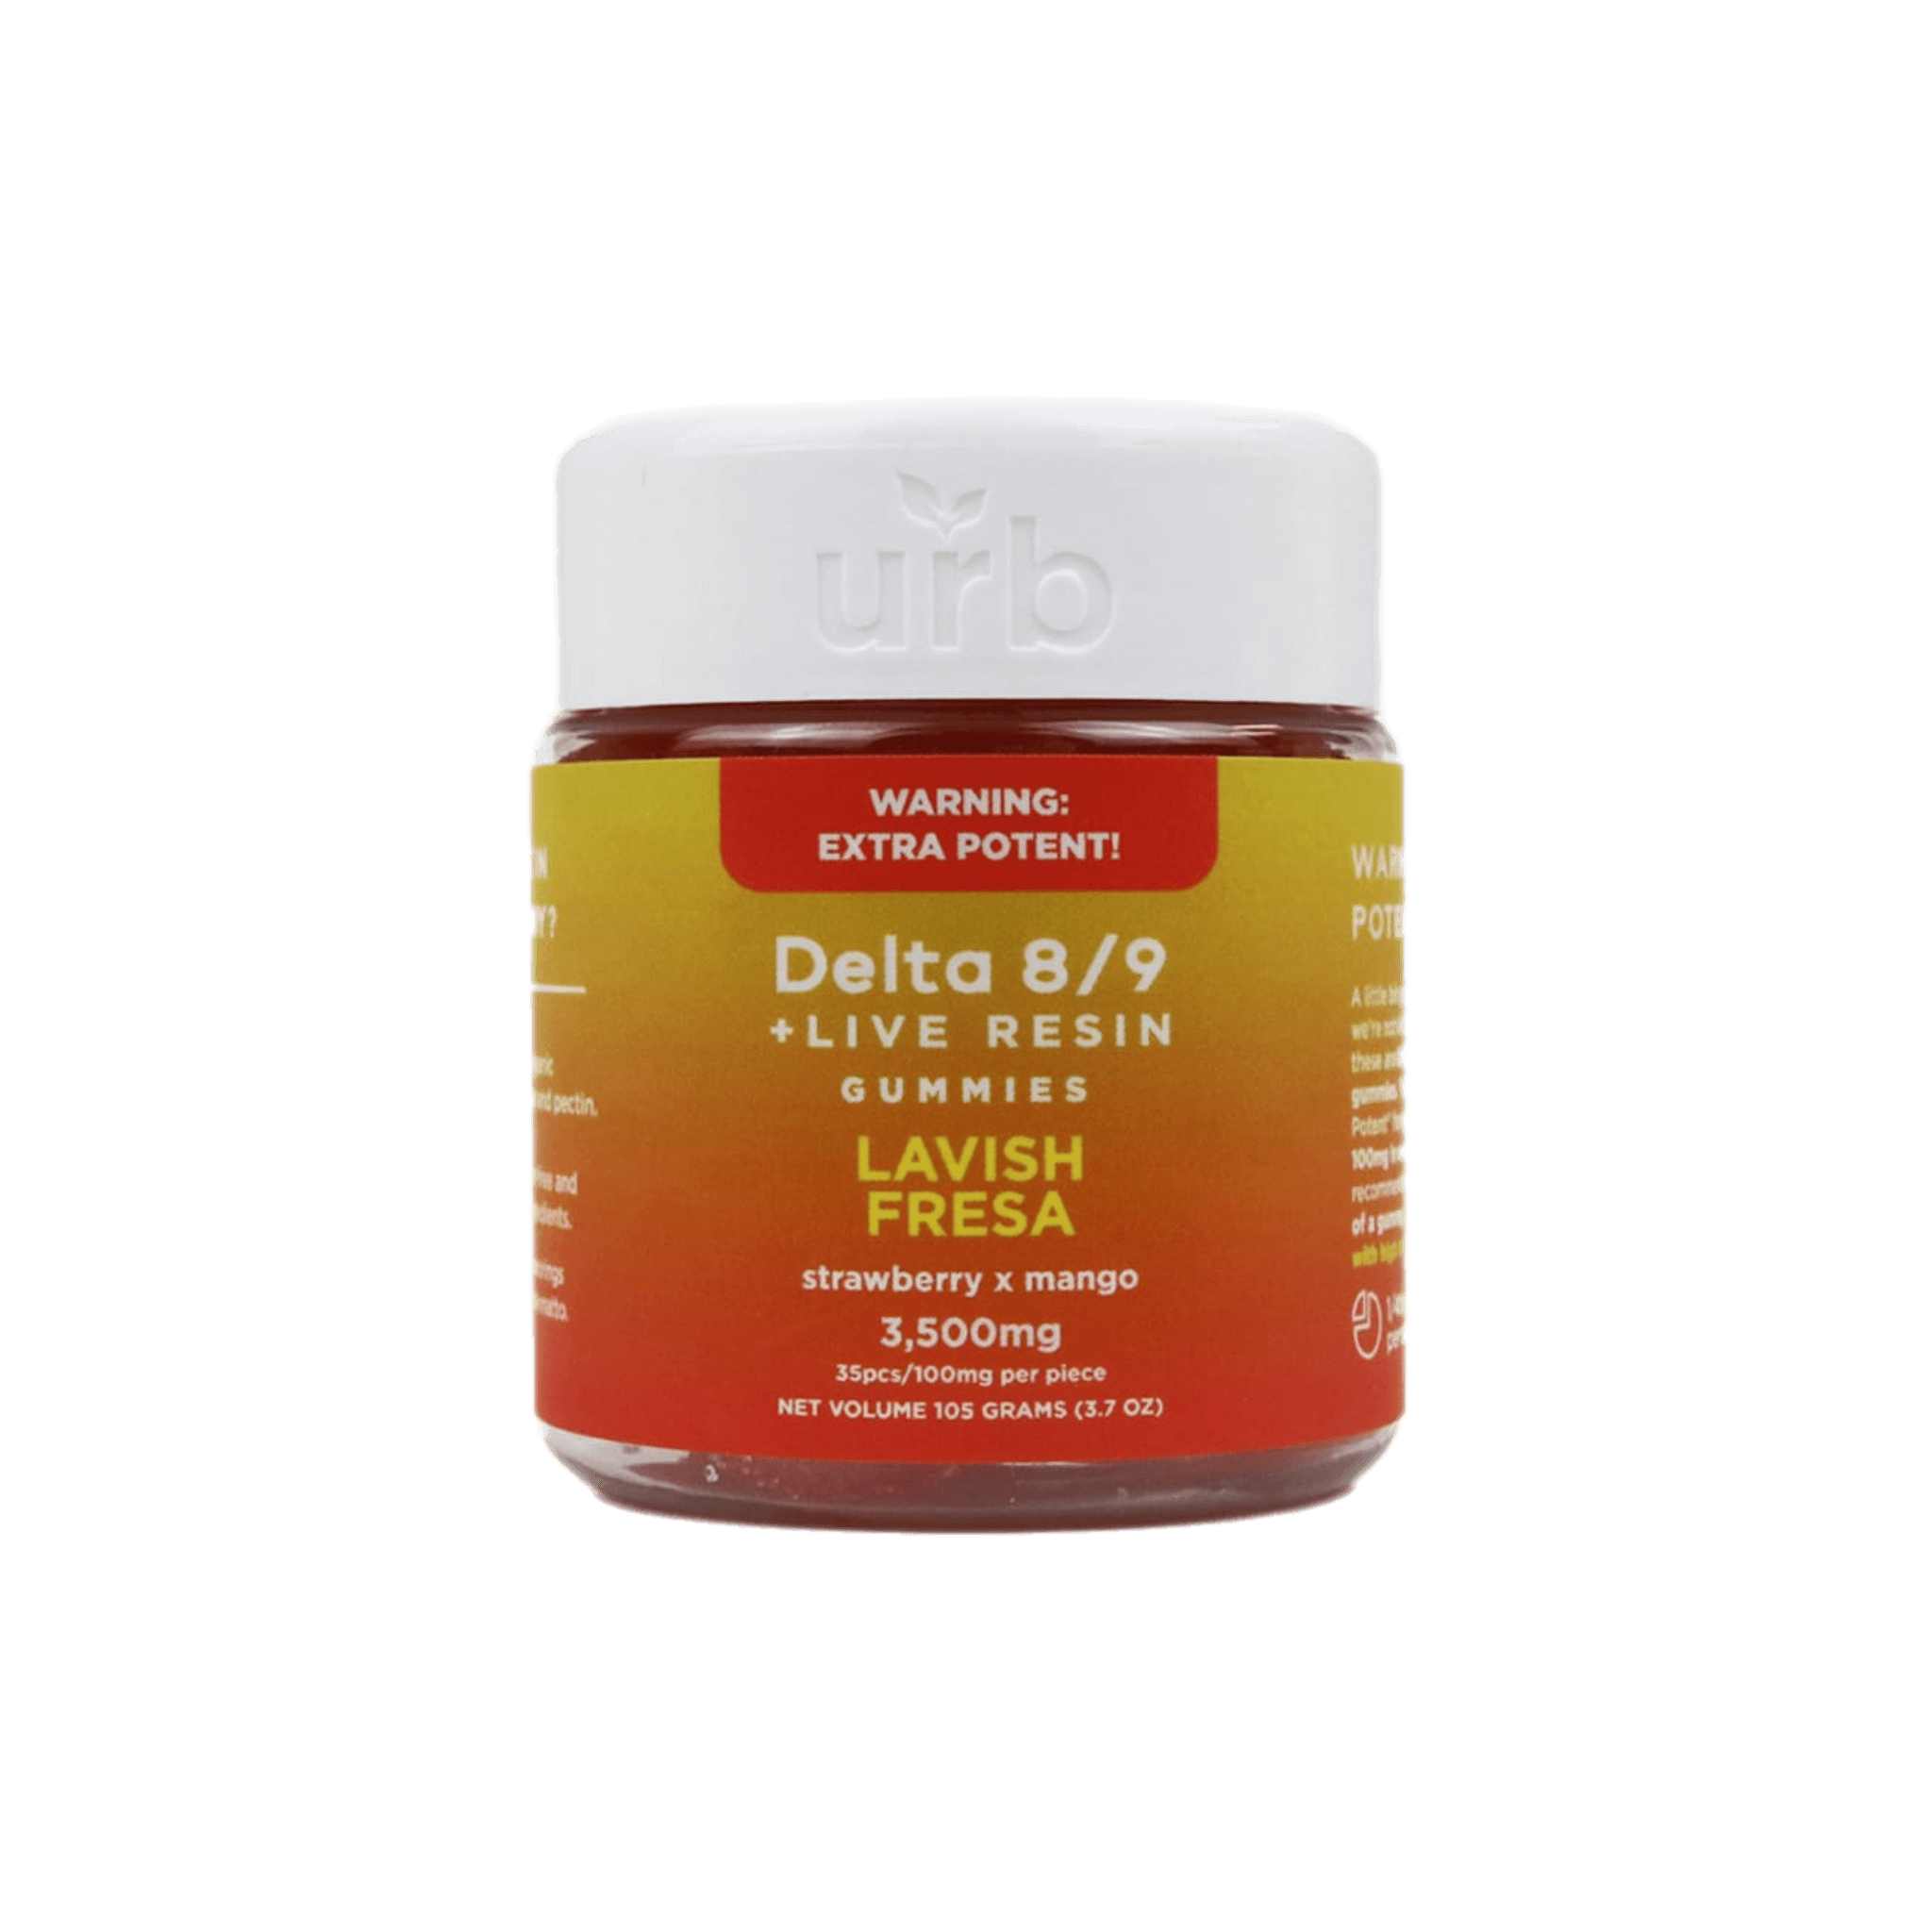 Urb Delta-8 and 9 THC Live Resin Edible Gummies 3500mg | Urb Delta 8/9 Edible Live Resin Gummies - Lavish Fresa 100mg per piece | Urb Lavish Fresa D8 and D9 Gummies 35 gummies/100mg each | CBD Direct Solutions